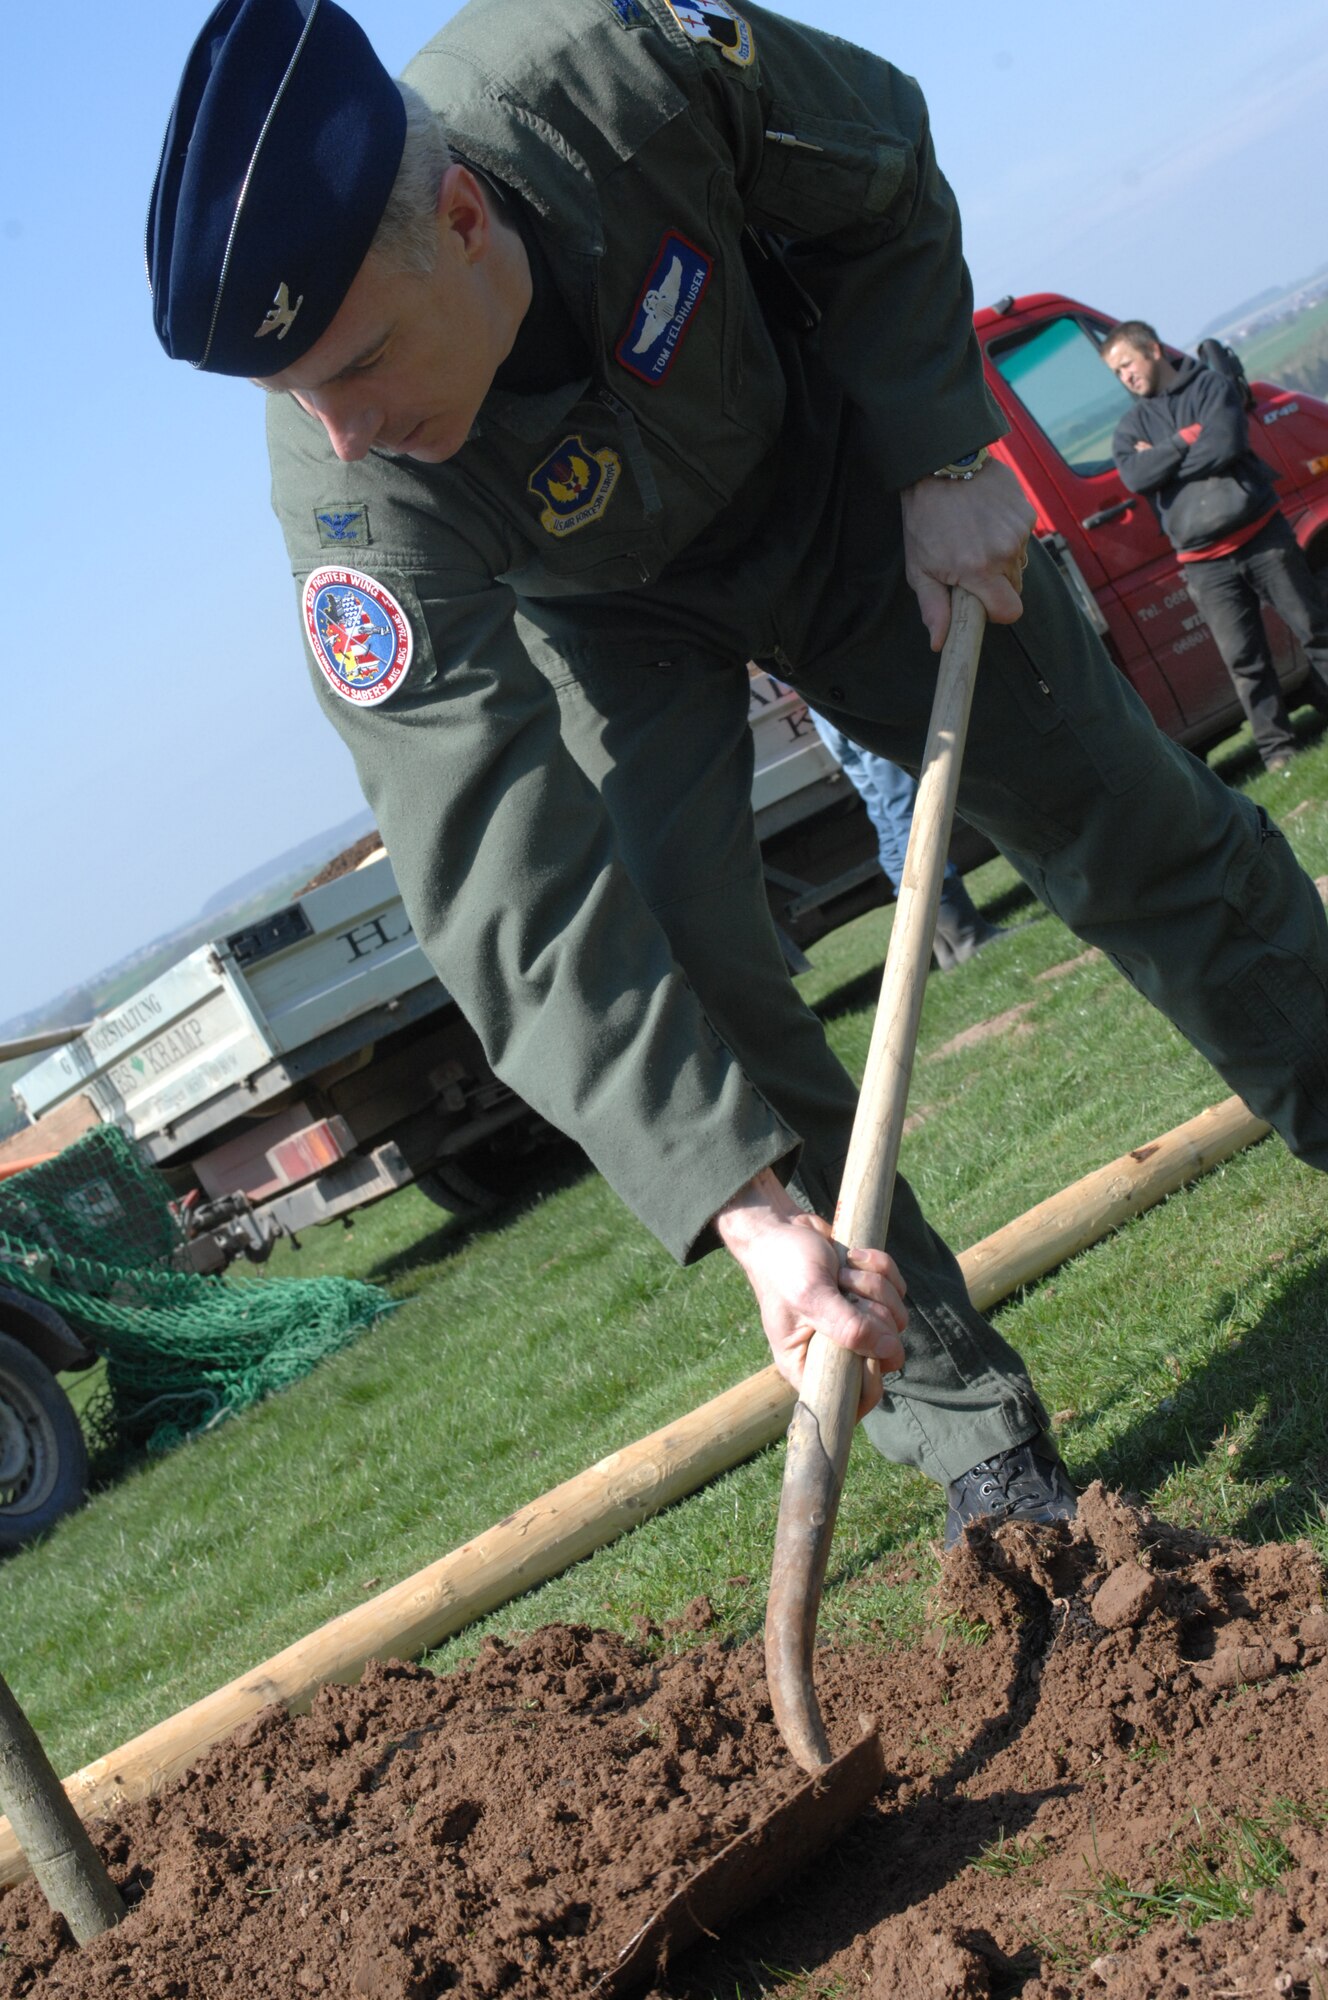 SPANGDAHLEM AIR BASE, Germany -- Col. Thomas Feldhausen, 52nd Fighter Wing commander, spreads dirt around the base of one of the many trees planted at the Eifel Mountain Golf Course April 18, 2008. Colonel Feldhausen and other members of the base planted the trees in honor of Earth Week.  (U.S. Air Force Photo/Airman 1st Class Jenifer Calhoun)